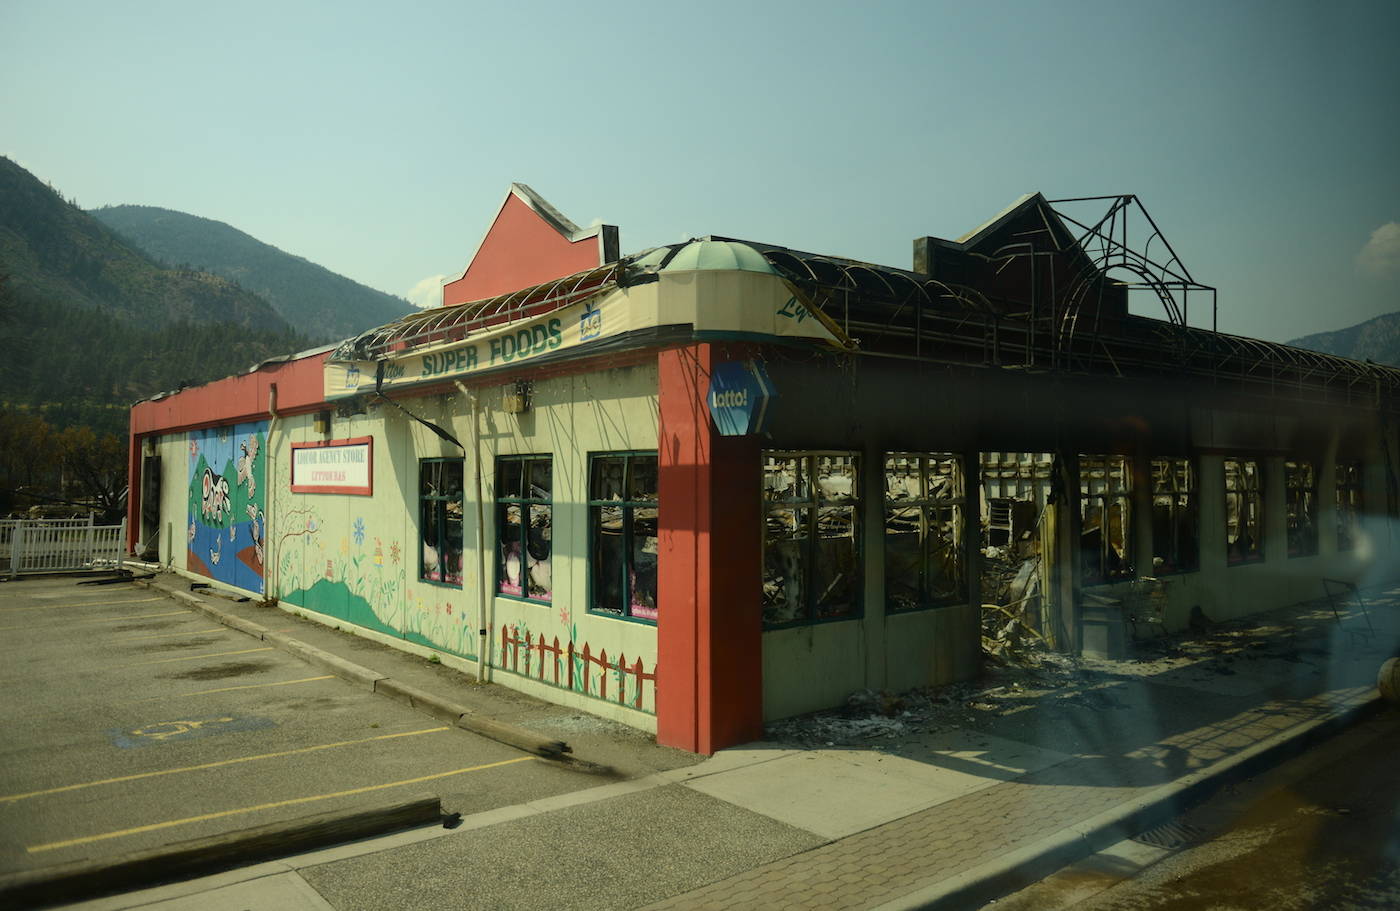 The Lytton Super Foods grocery store in Lytton, B.C. on Friday, July 9, 2021, nine days after a wildfire ripped through the village on June 30, 2021. (Jenna Hauck/ Black Press Media)